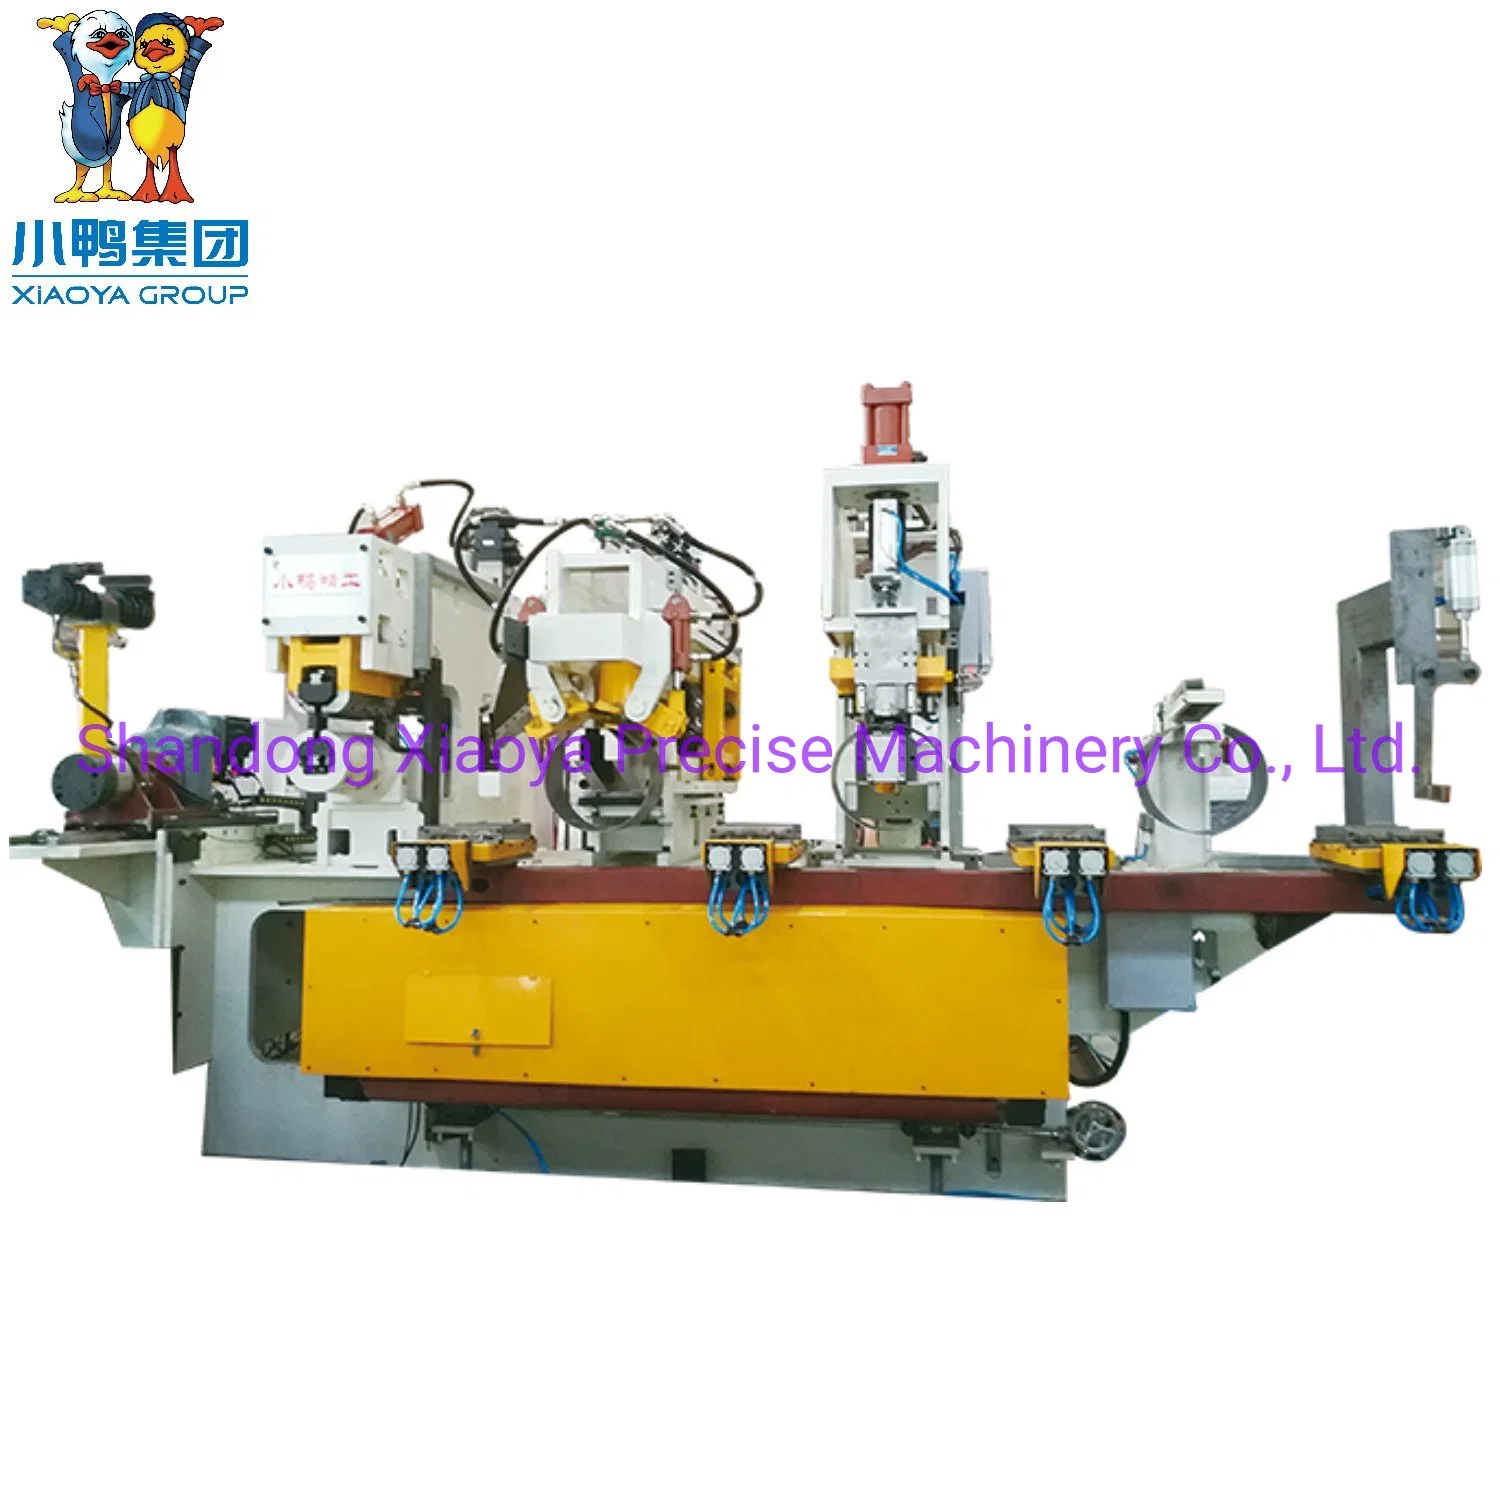 Trimmer, Planisher, End Cutting Machine for Wheel Rim Production Line